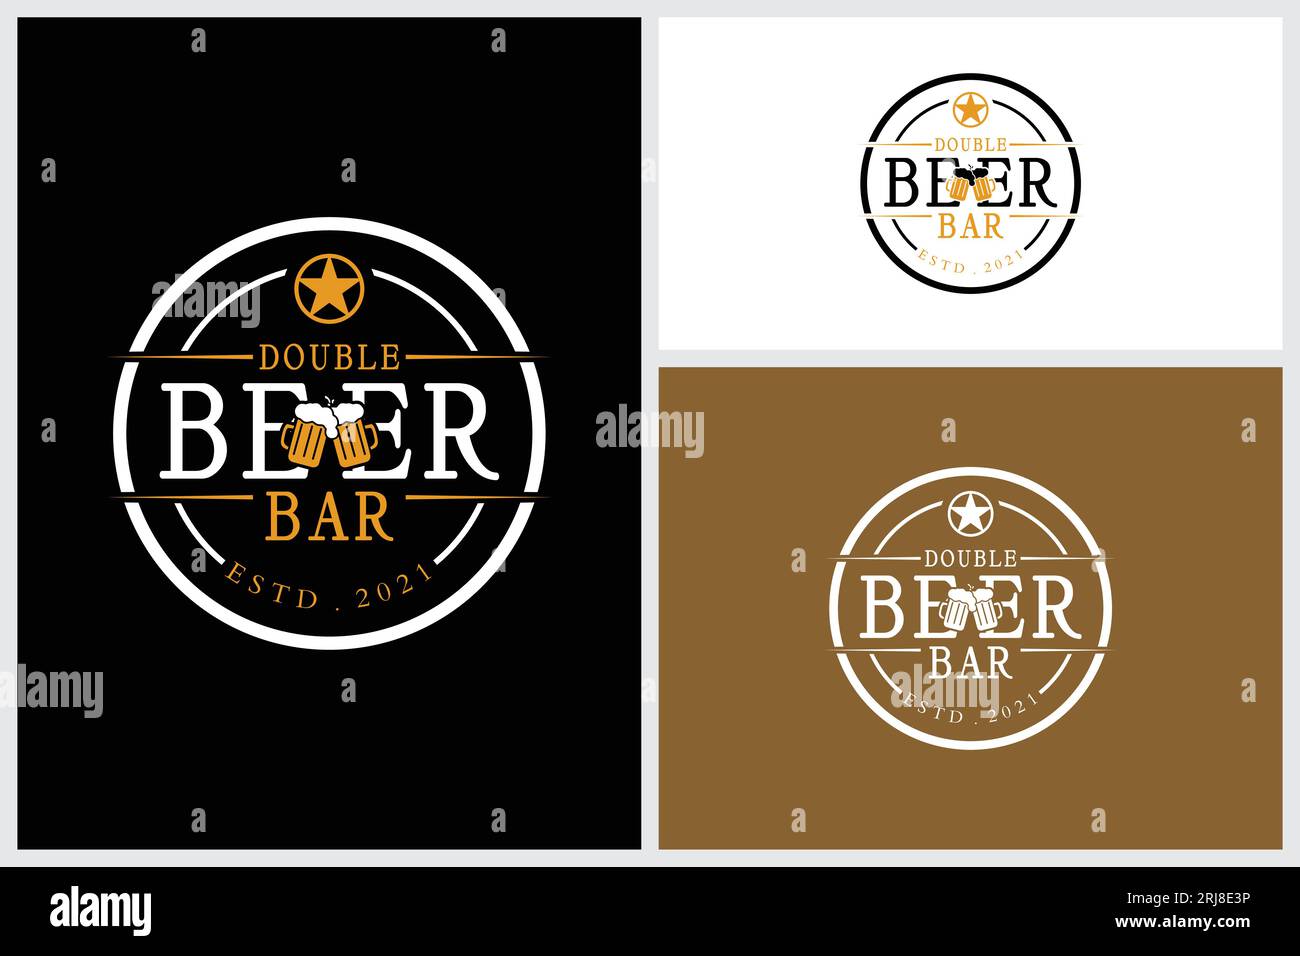 Beer Bar Company Night Club Logo With Beer Glass Ale Stock Vector